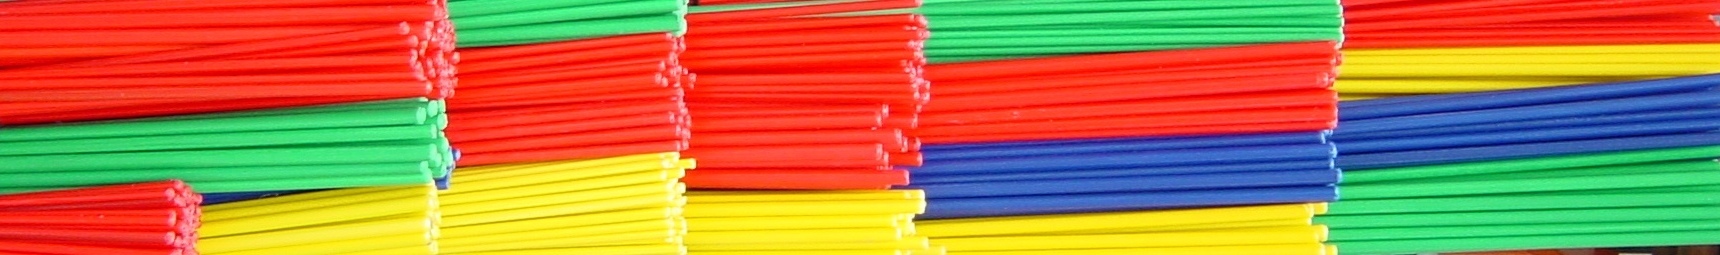 thermoplastic composite rods from recycled plastic